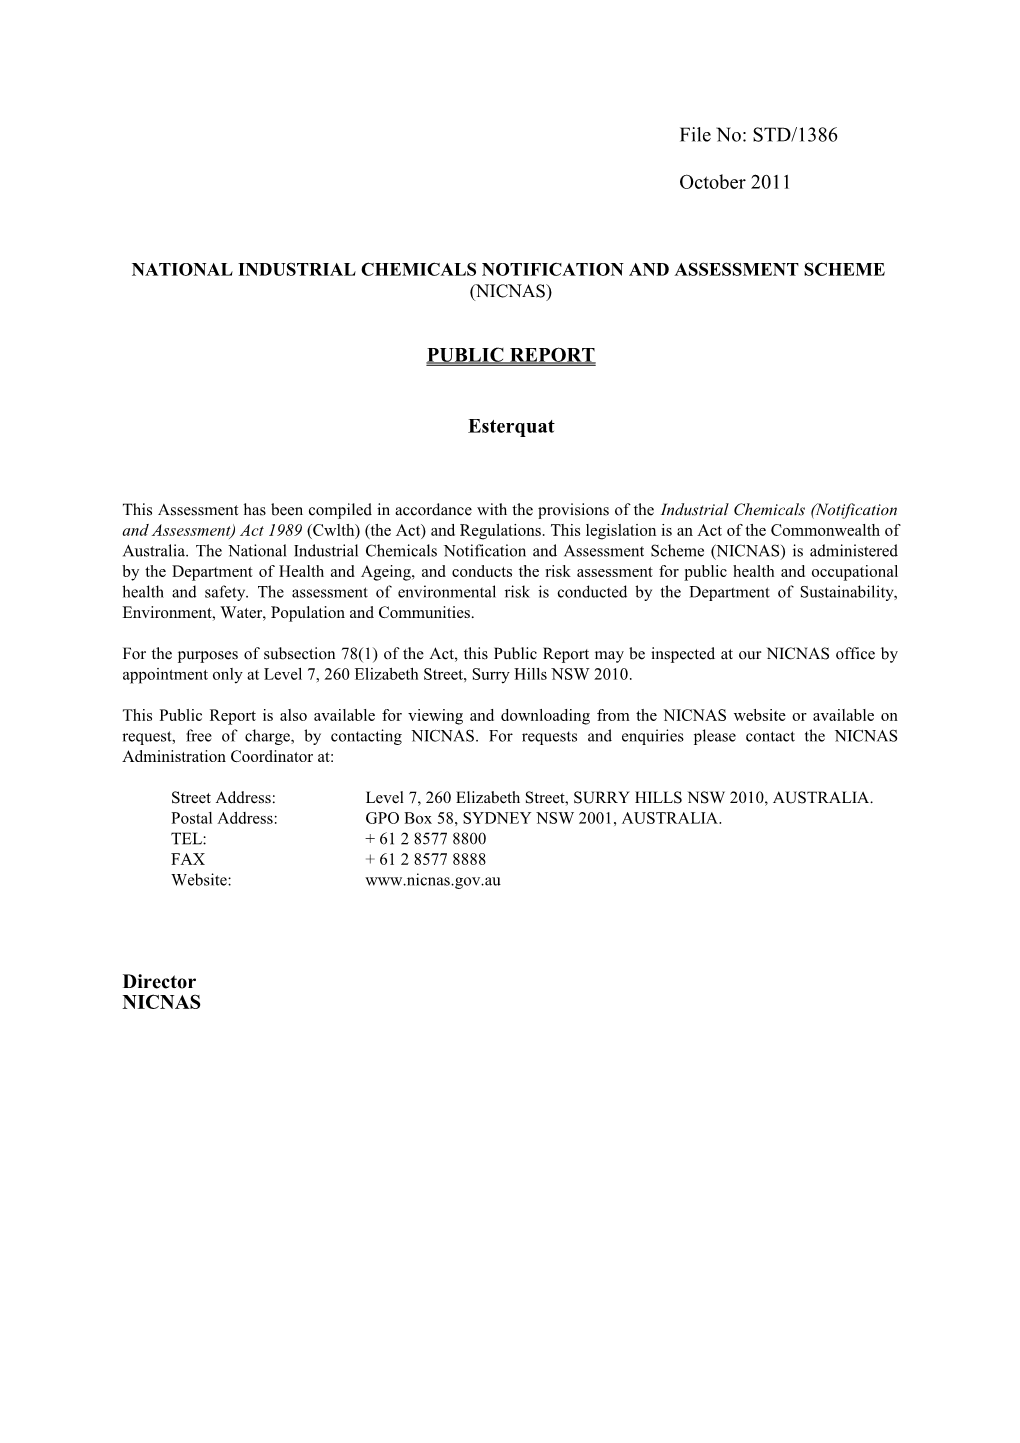 National Industrial Chemicals Notification and Assessment Scheme s1